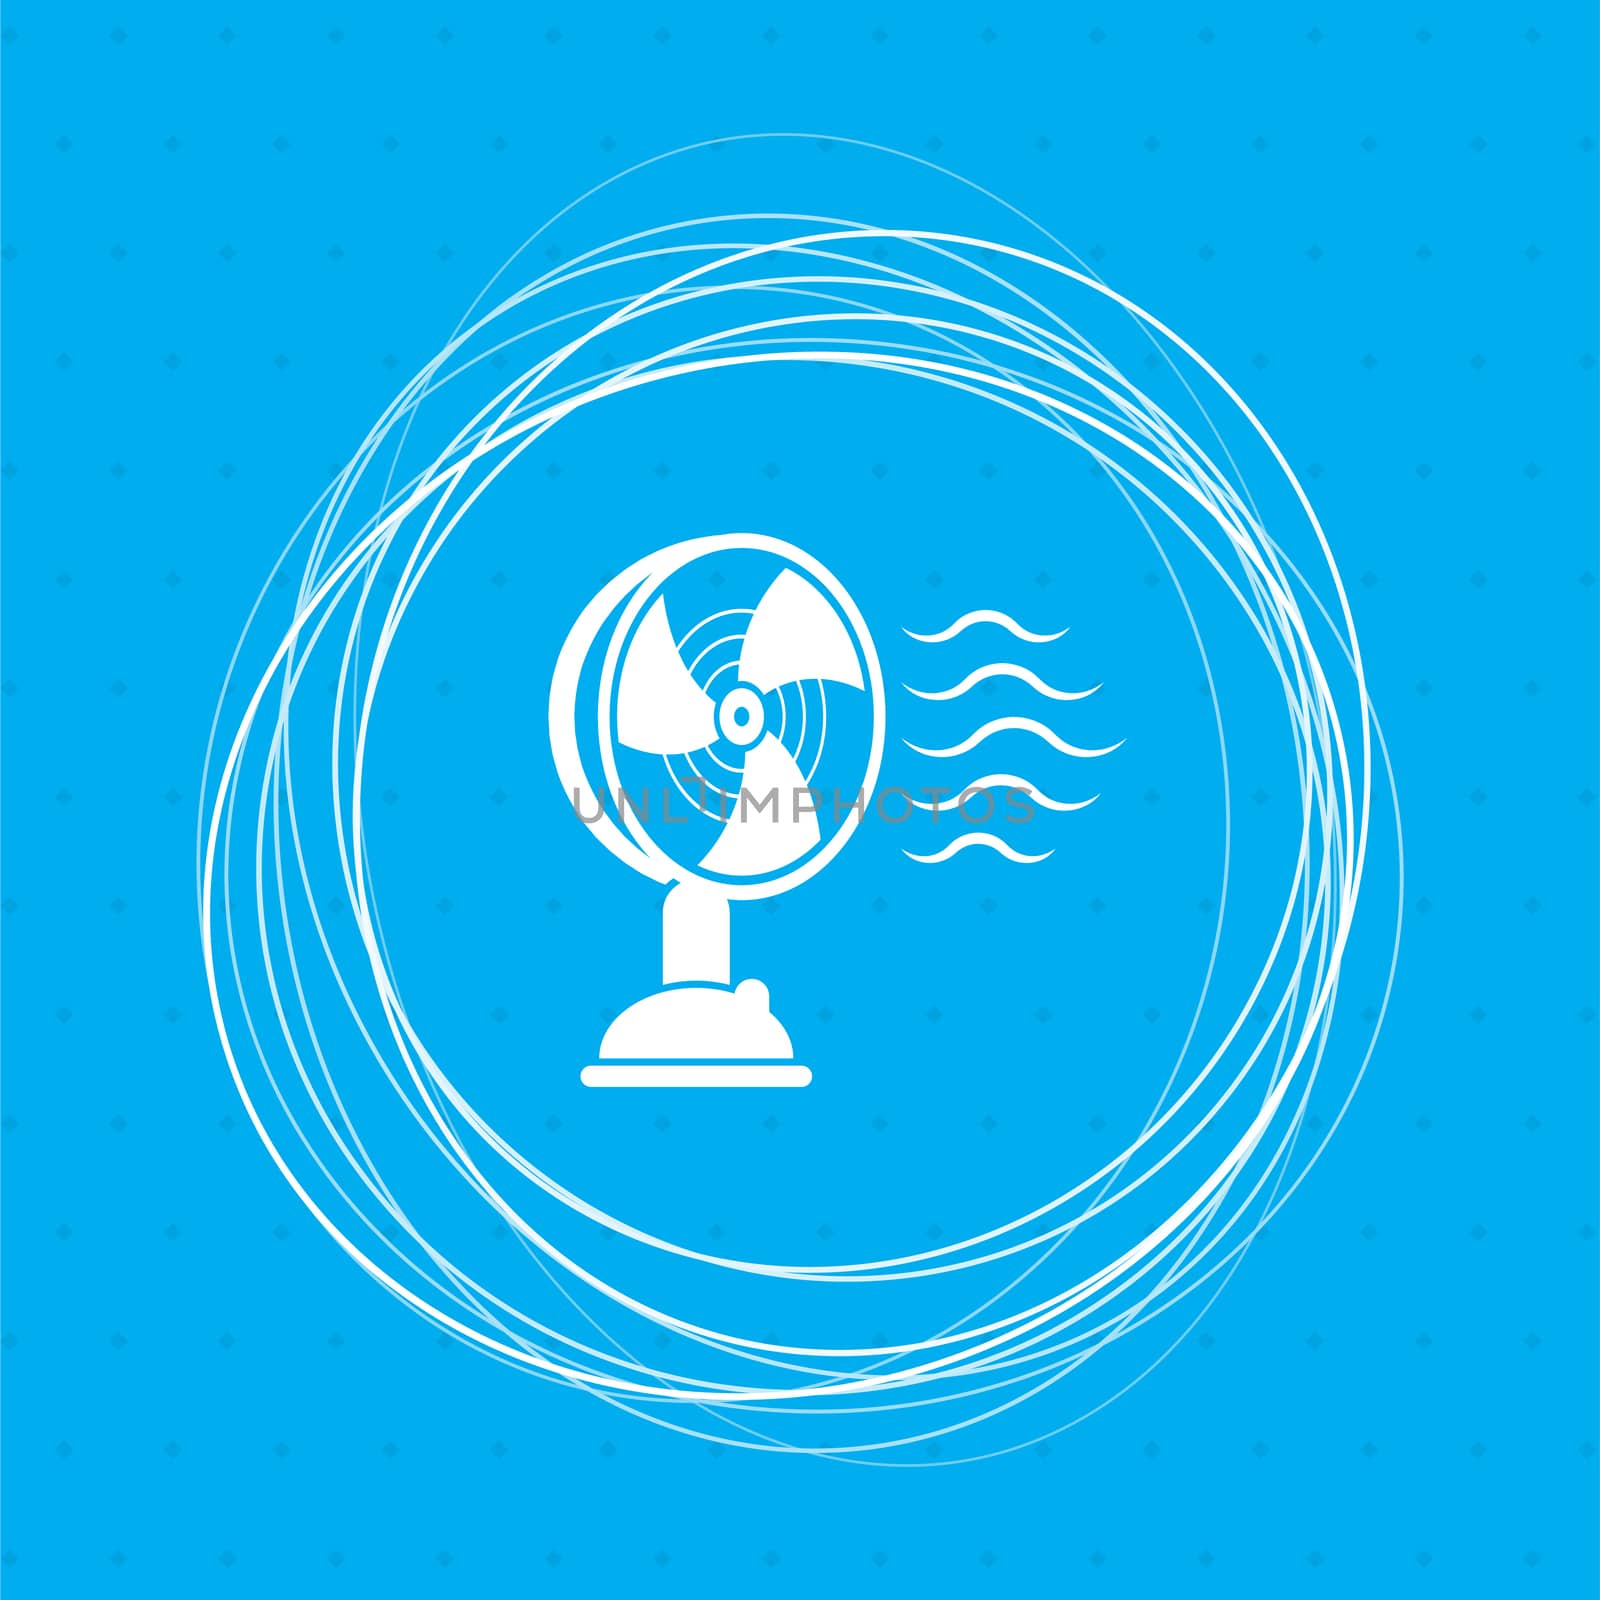 Fan icon on a blue background with abstract circles around and place for your text. illustration